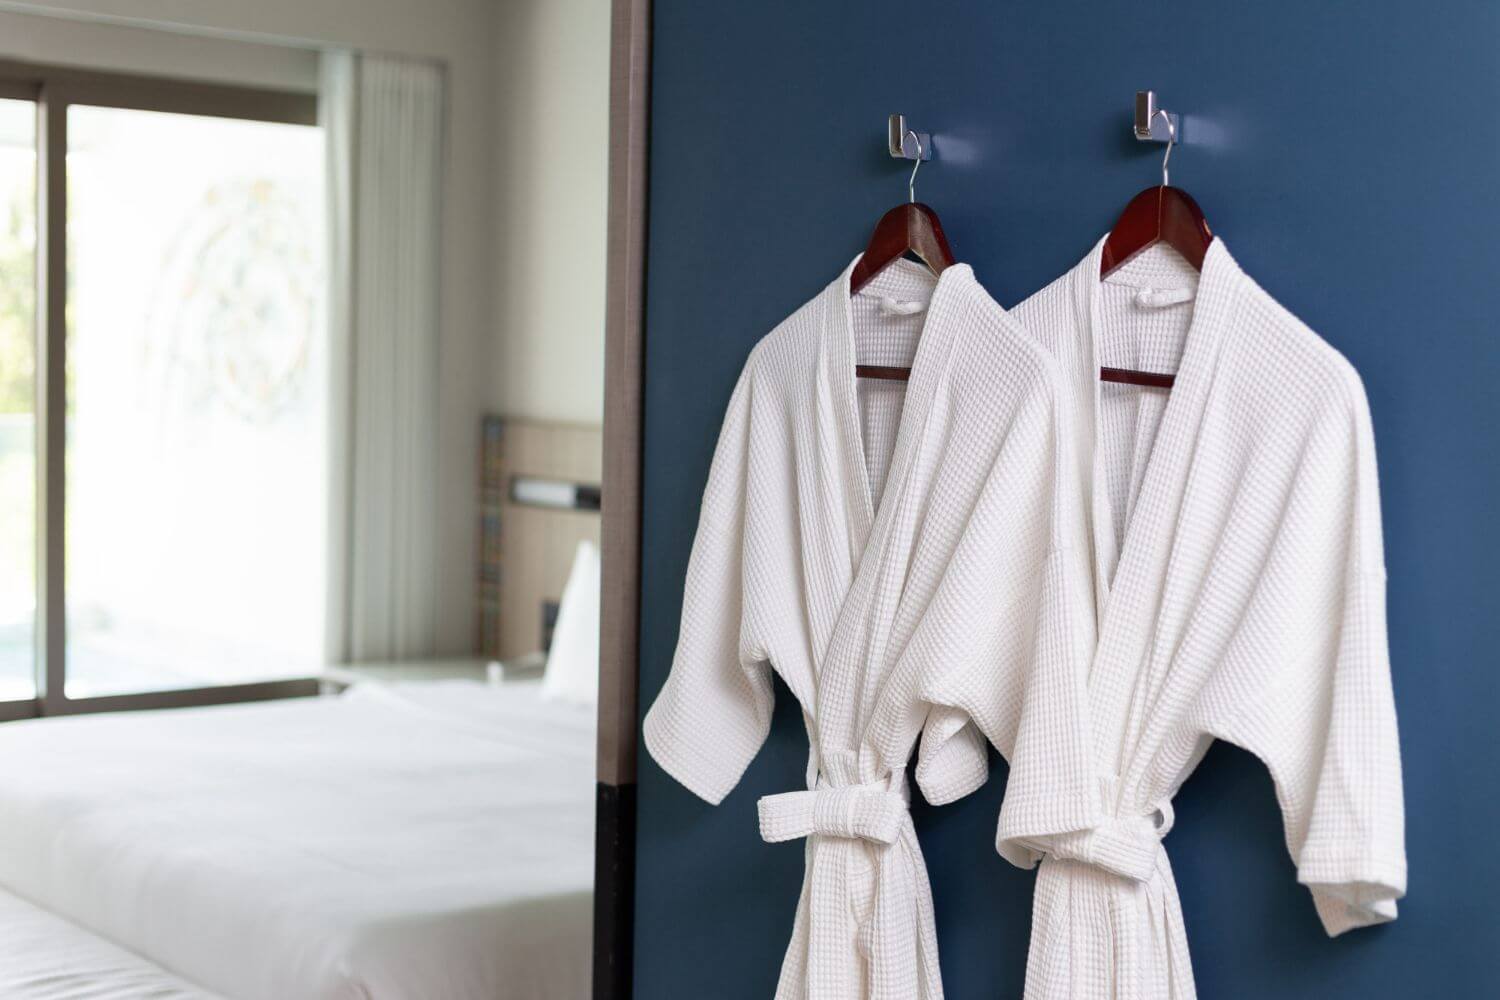 We offer customized bathrobe options with different models and color options.